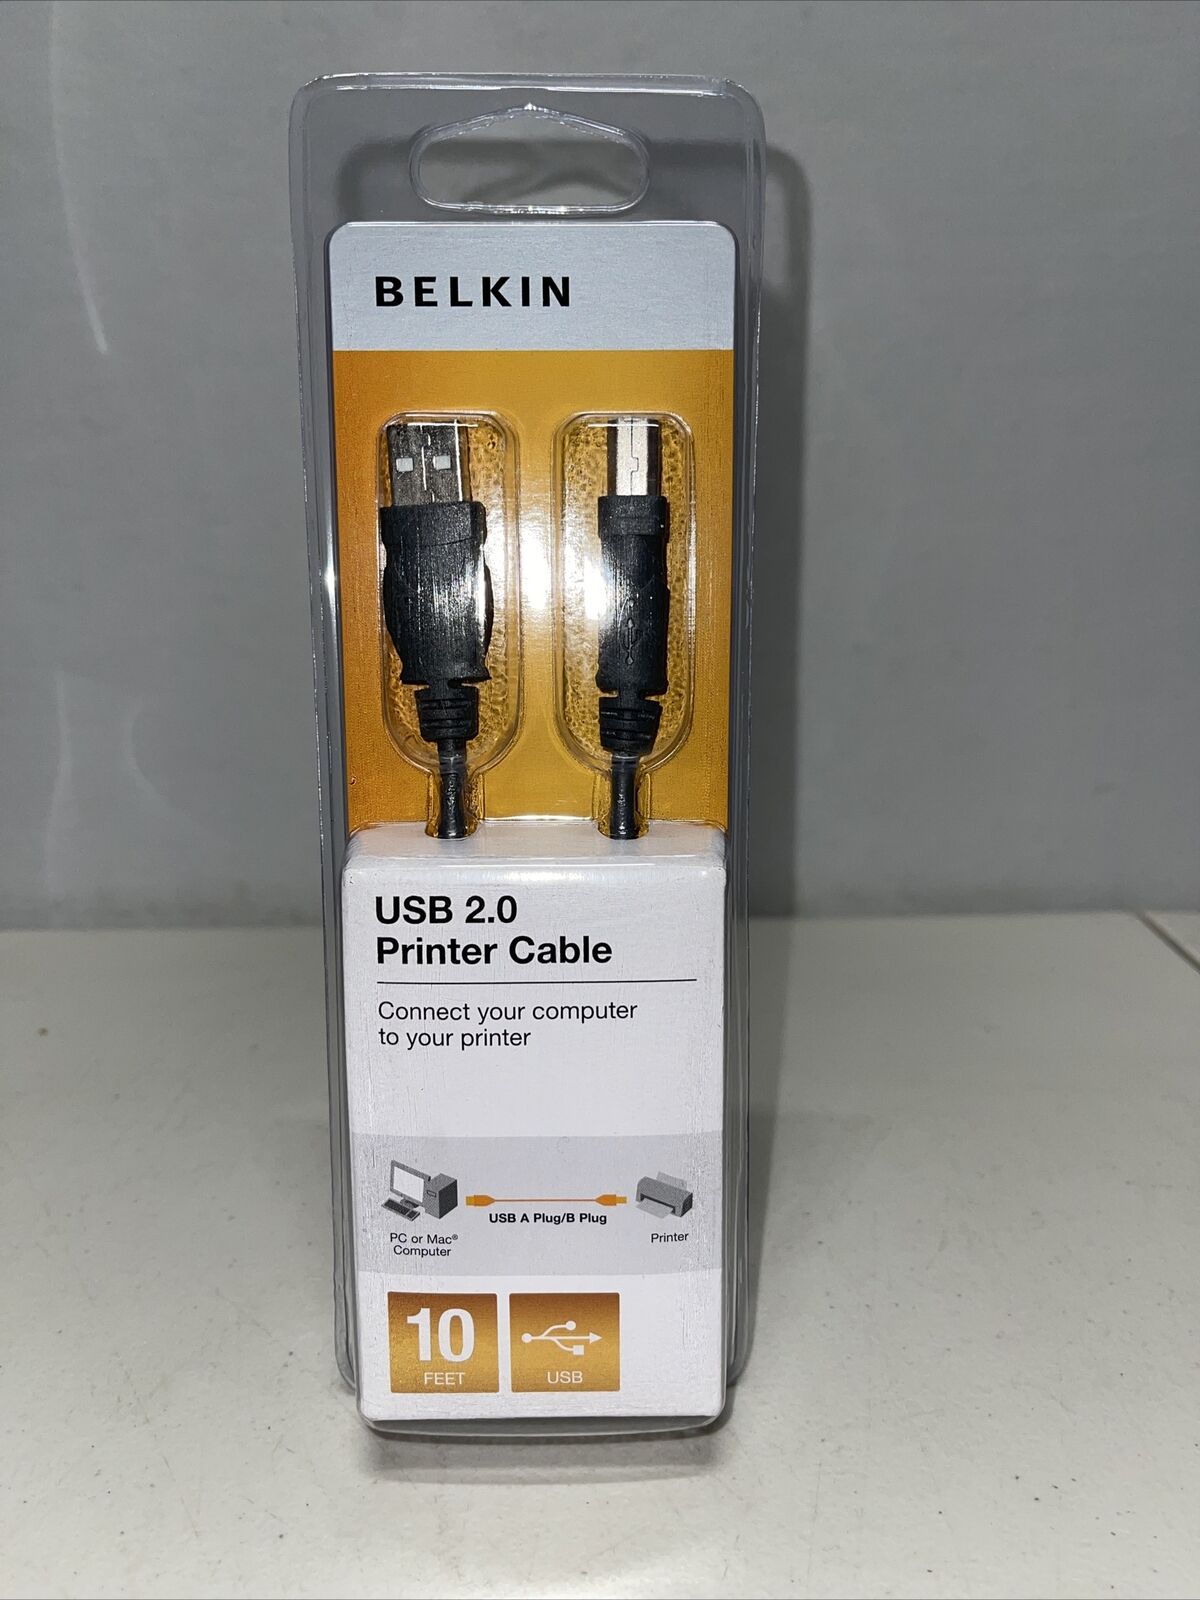 BELKIN USB 2.0 Printer Cable 10’ Connect Computer To Printer PC Mac-FREE SHIP